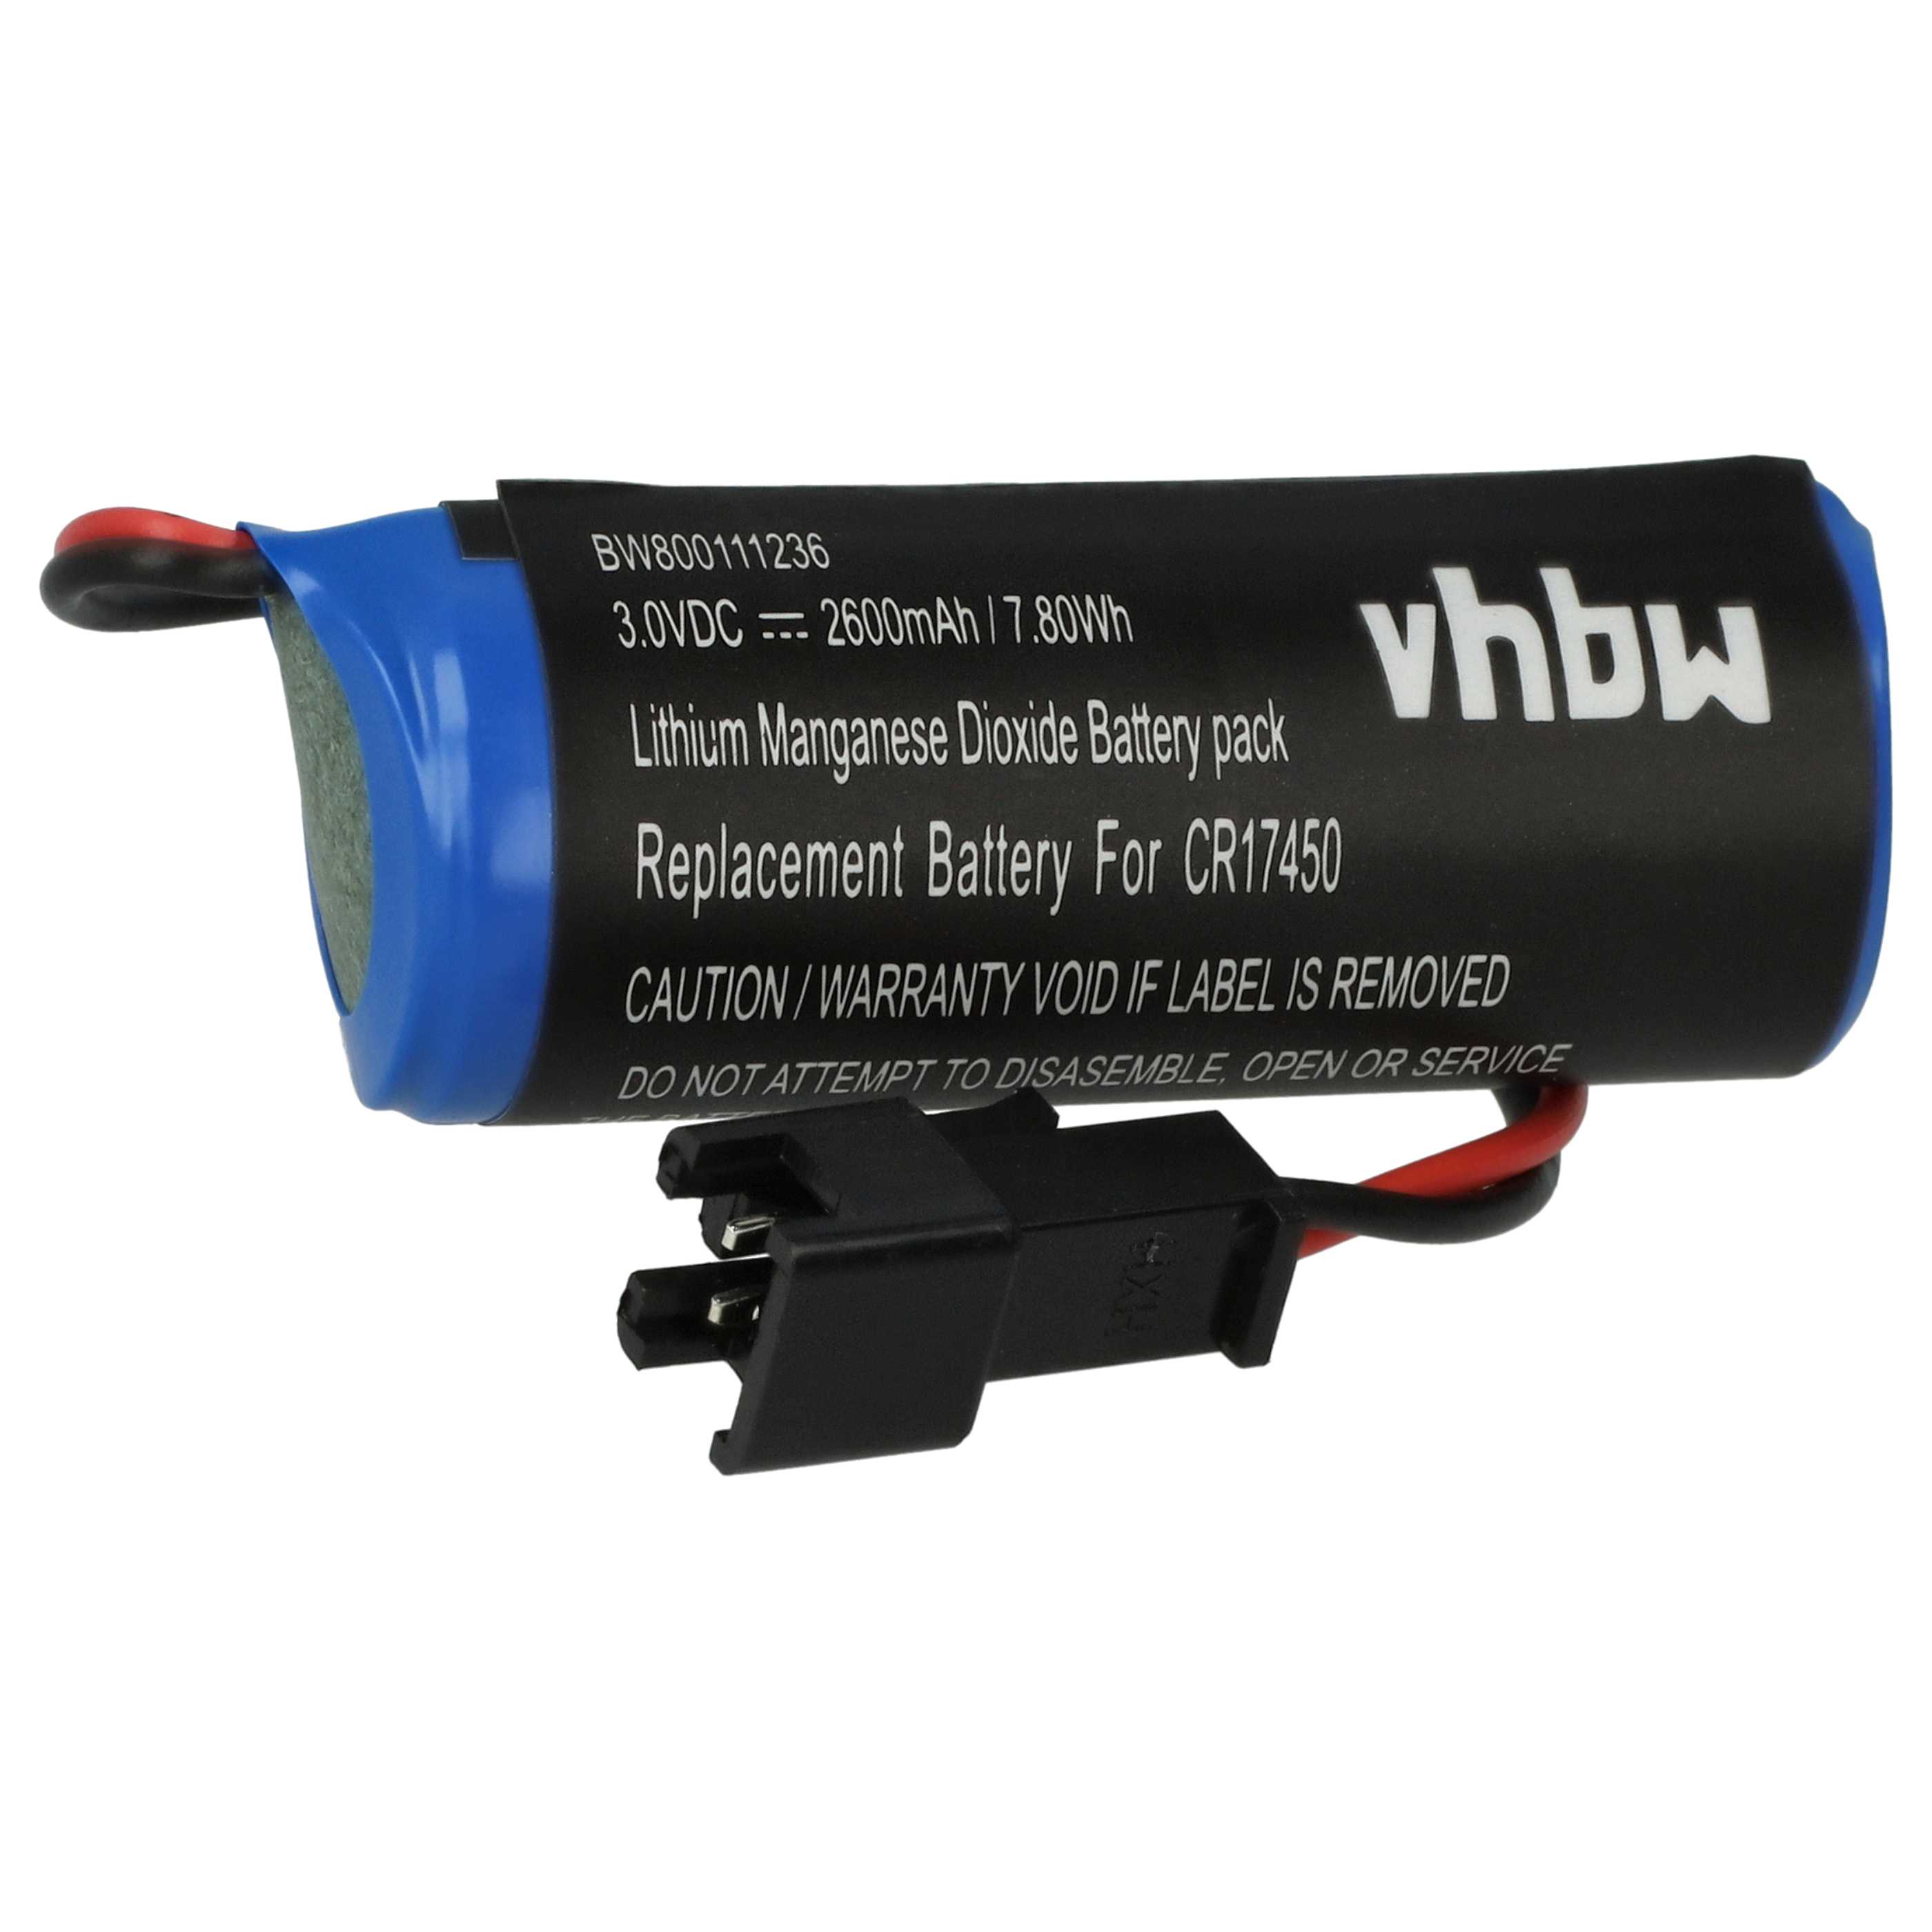 CNC Controller Battery Replacement for CR17450 - 2600 mAh 3 V Li-Ion